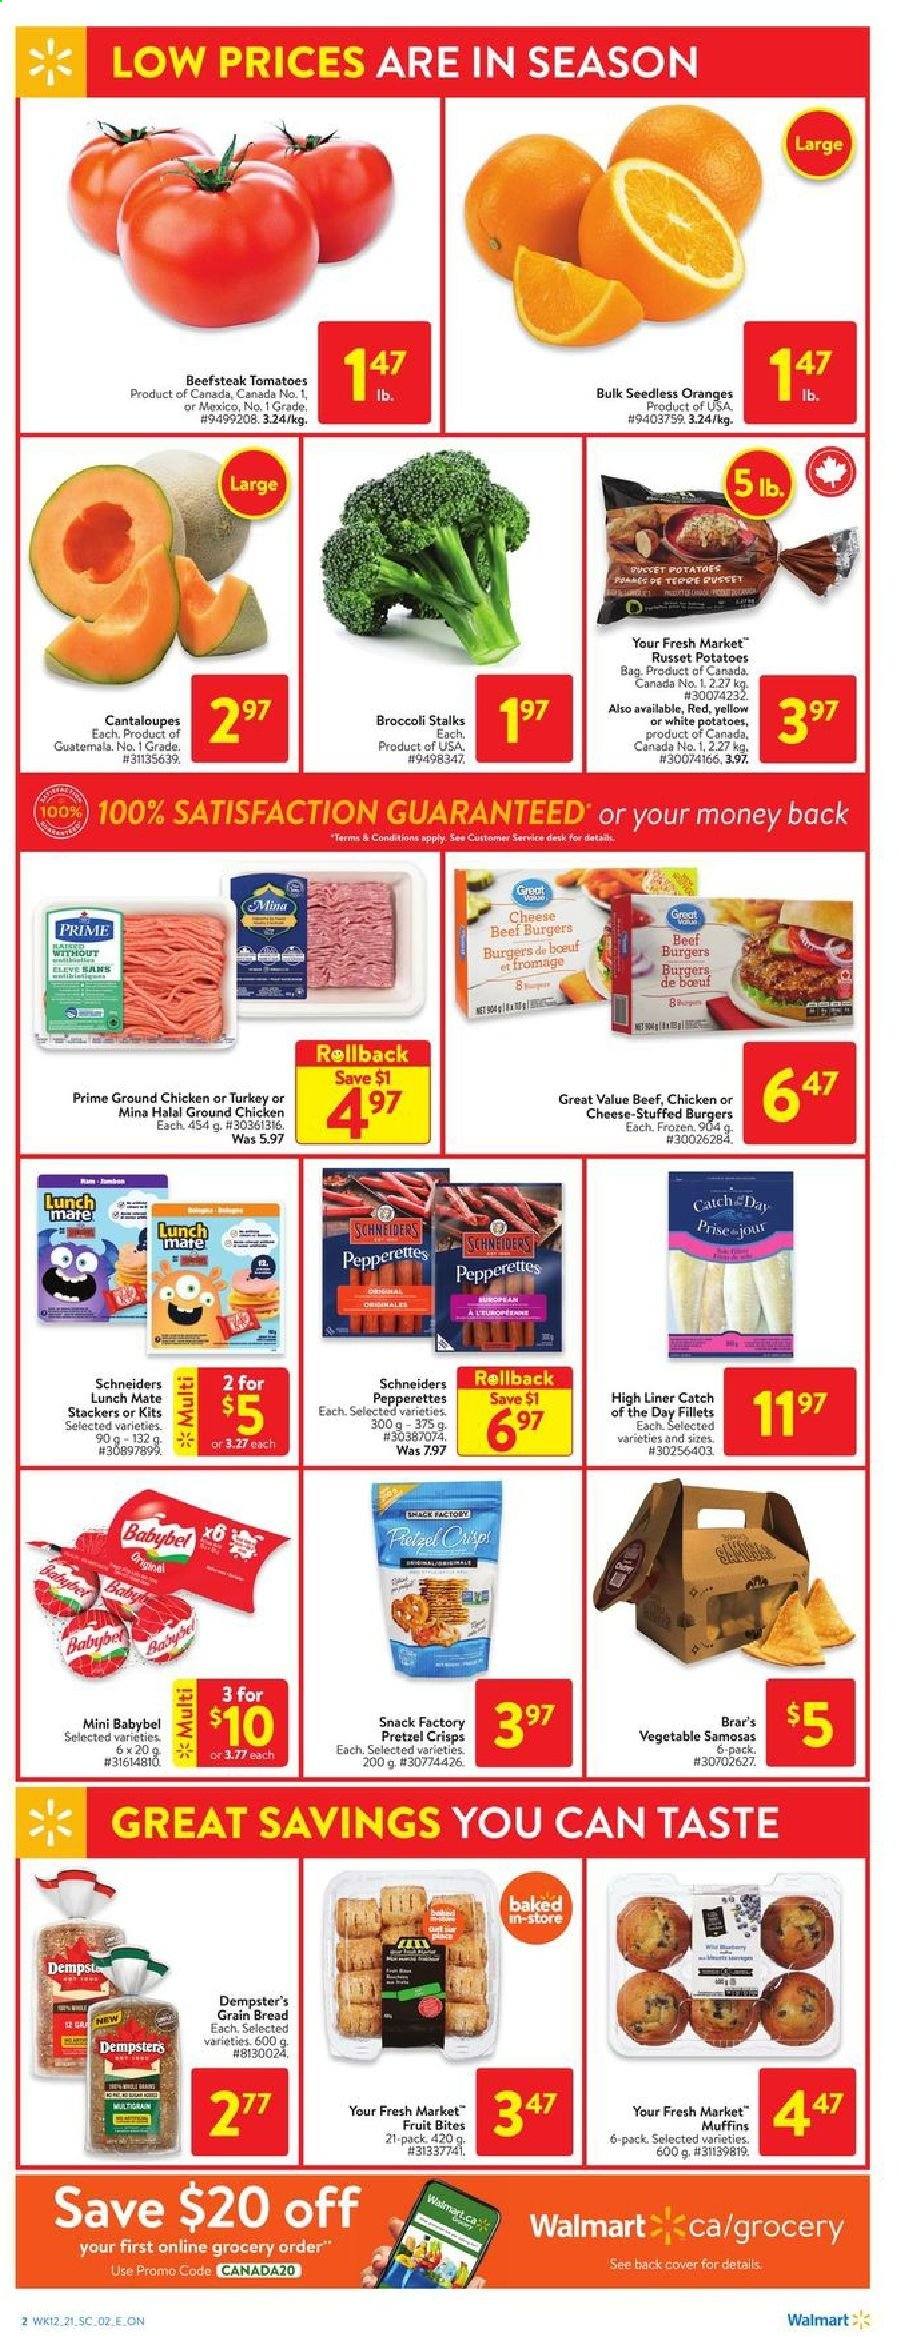 thumbnail - Walmart Flyer - April 15, 2021 - April 21, 2021 - Sales products - bread, Ace, muffin, broccoli, cantaloupe, russet potatoes, tomatoes, potatoes, hamburger, beef burger, Babybel, snack, pretzel crisps, ground chicken, chicken. Page 2.